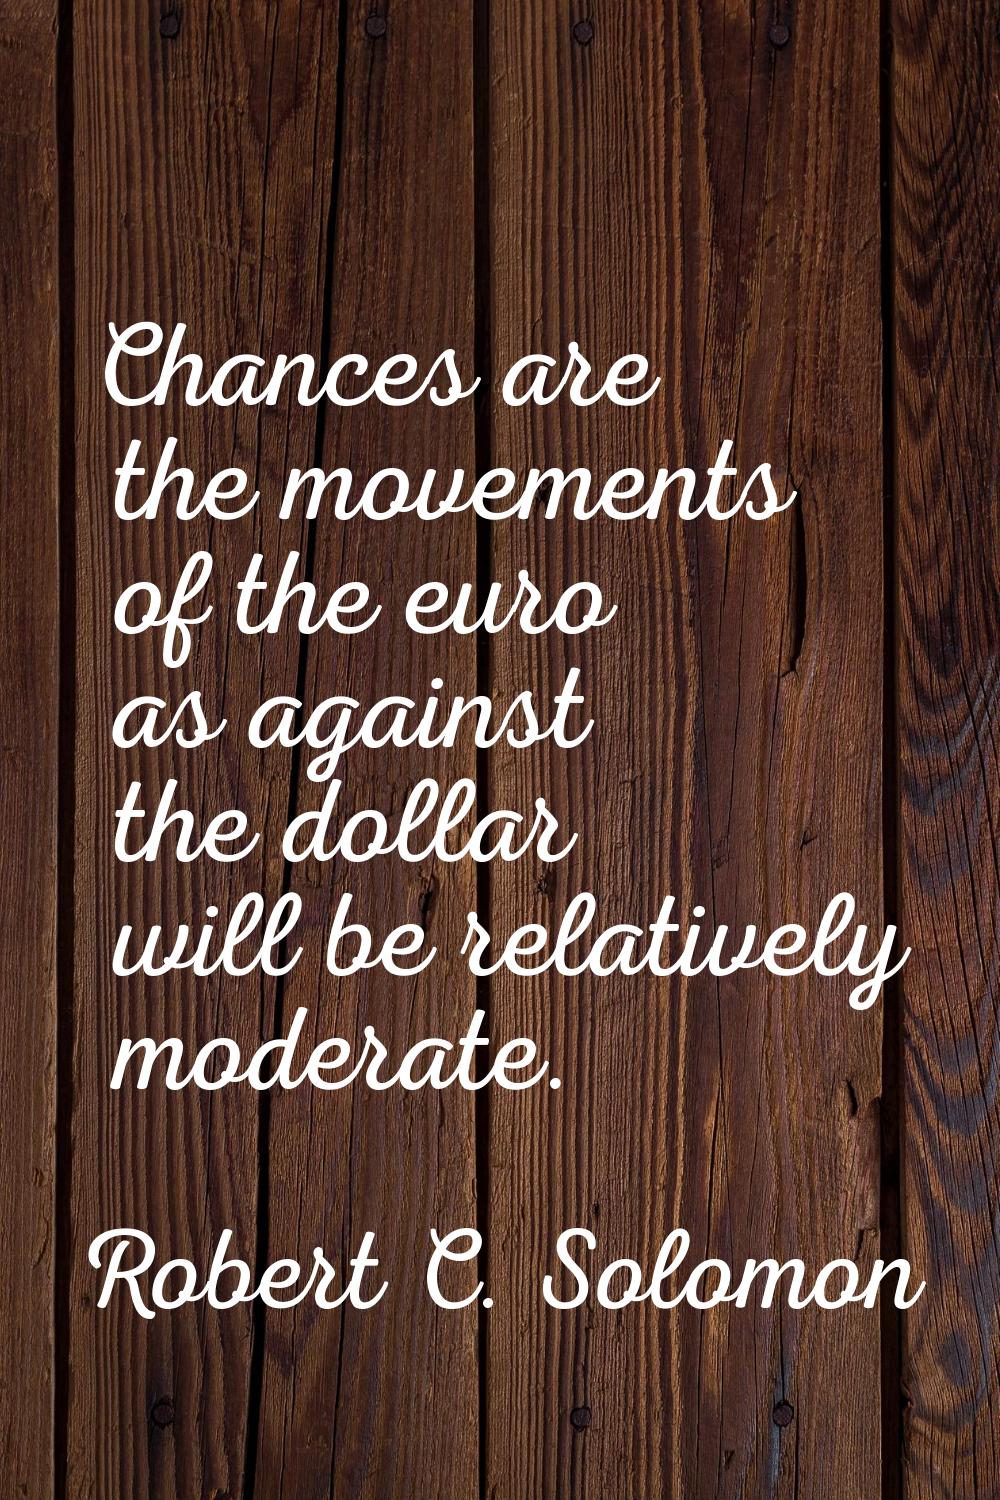 Chances are the movements of the euro as against the dollar will be relatively moderate.